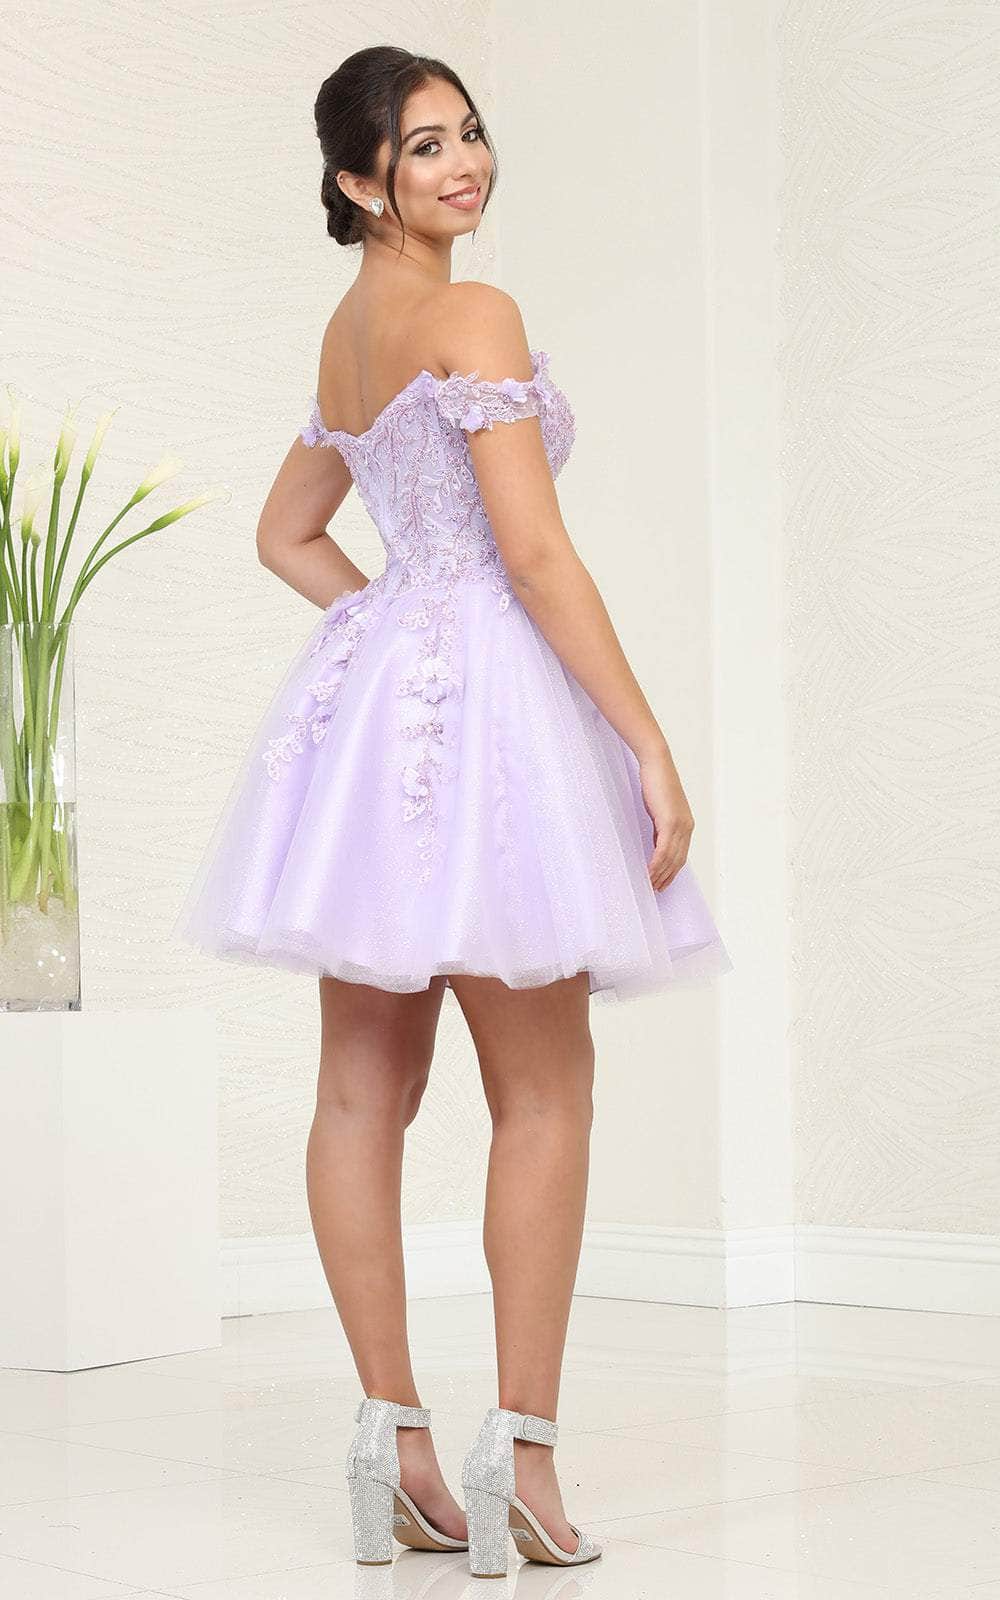 May Queen MQ2081 - A-Line Homecoming Dress Special Occasion Dresses